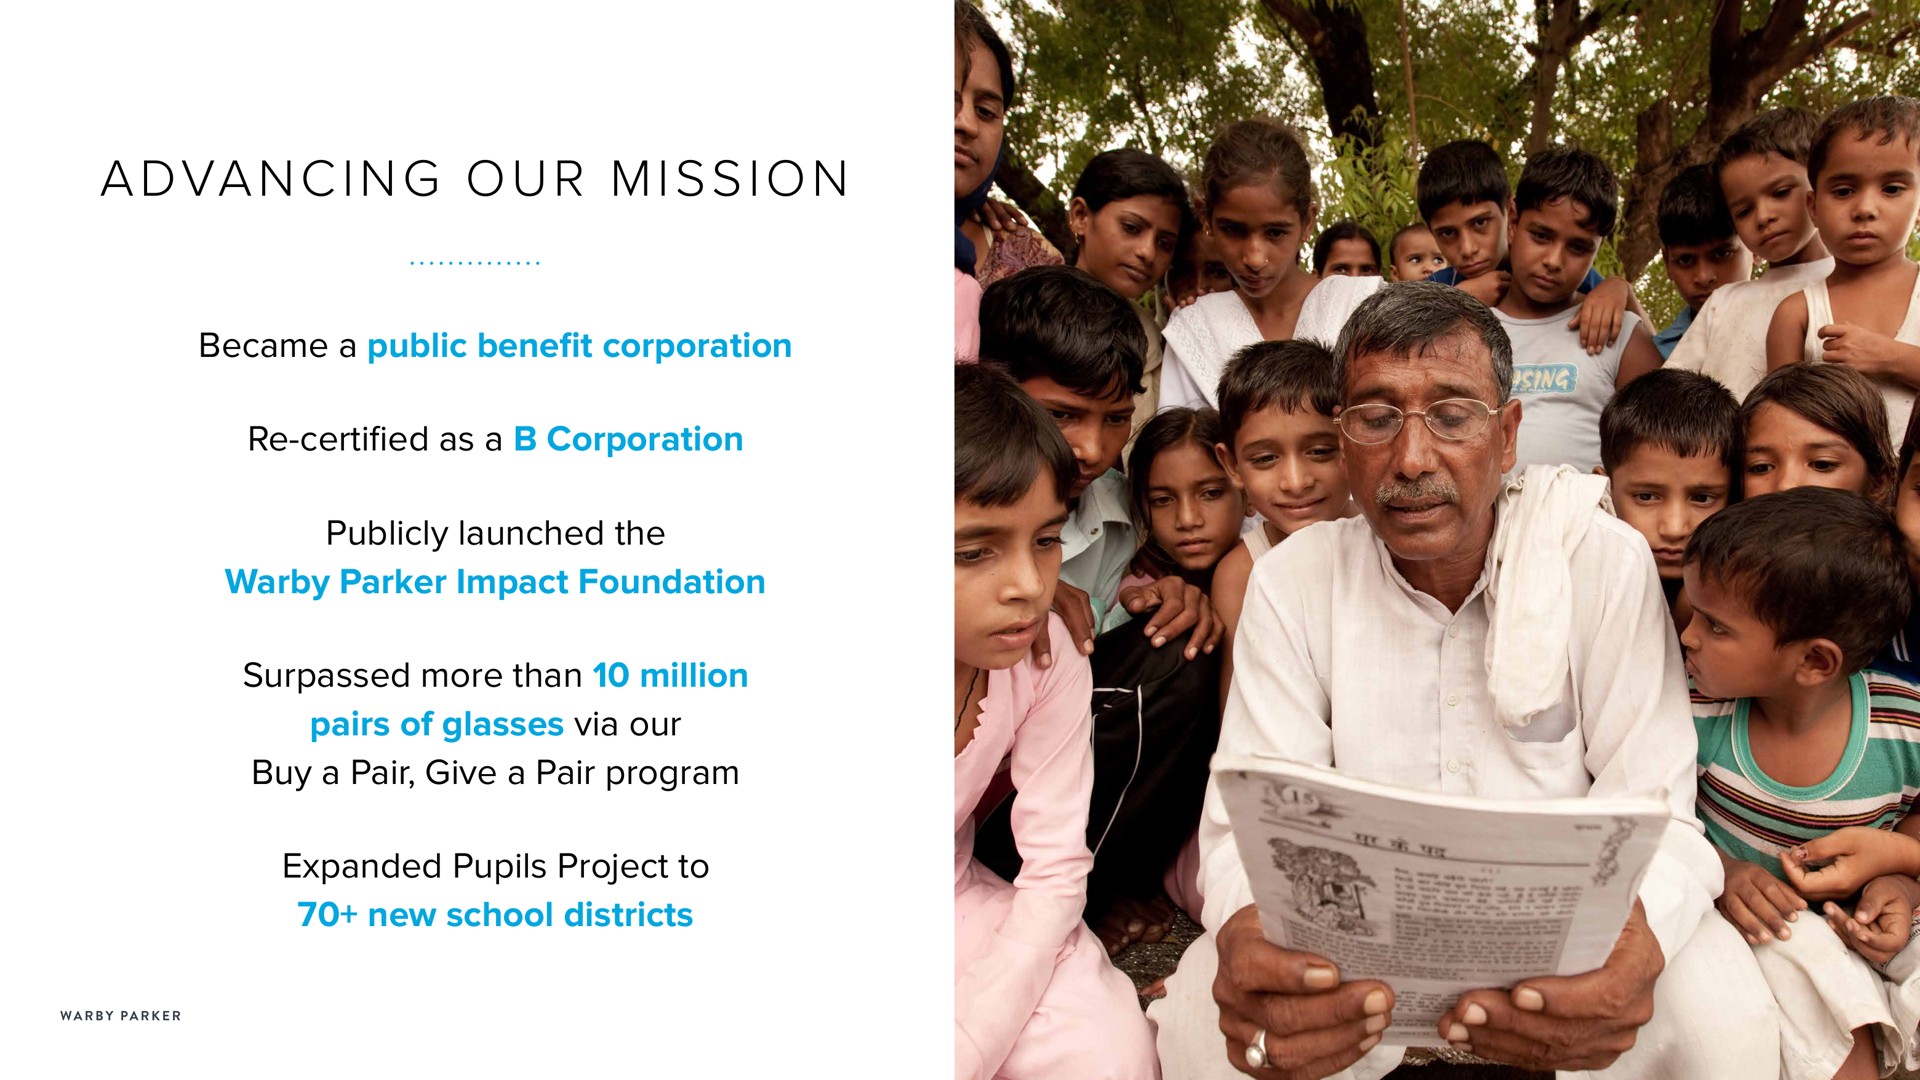 a i i i became a public benefit corporation certified as a corporation publicly launched the parker impact foundation surpassed more than million pairs of glasses via our buy a pair give a pair program expanded pupils project to new school districts gan advancing mission | Warby Parker